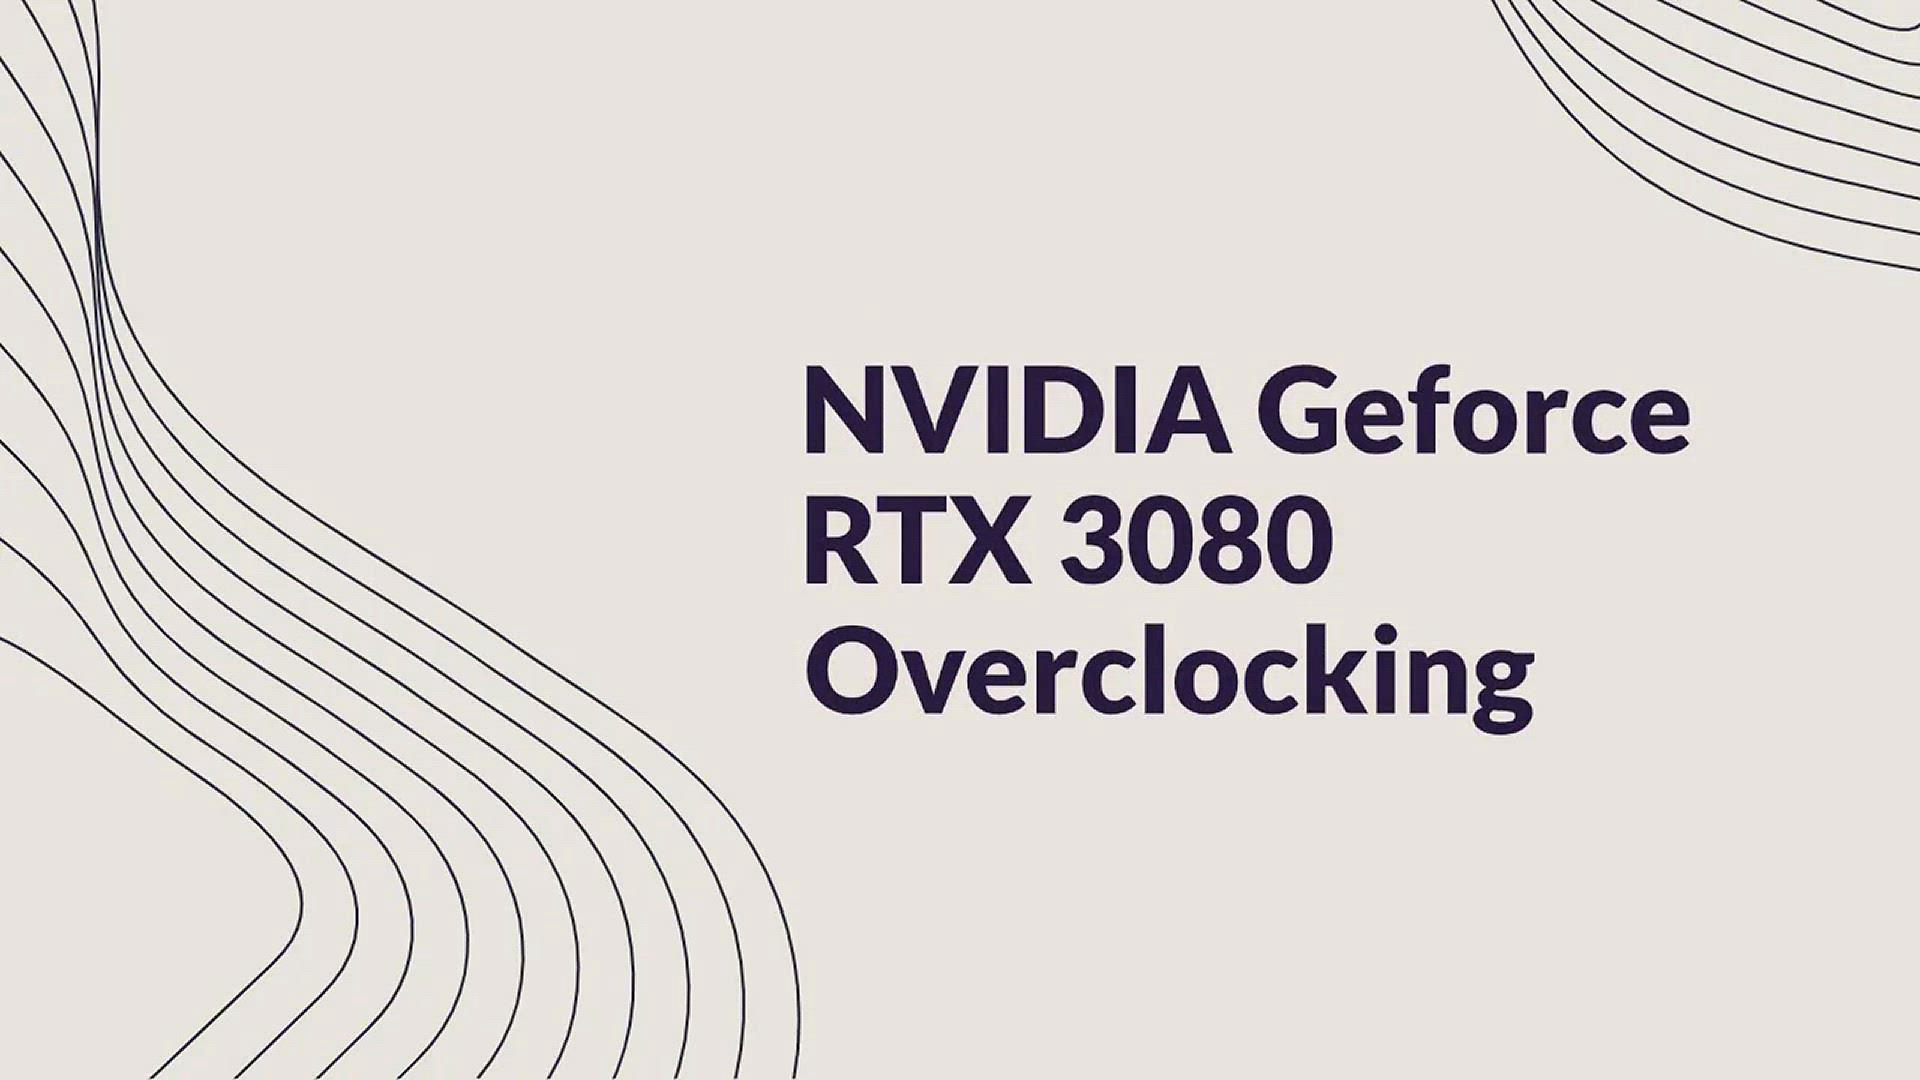 'Video thumbnail for NVIDIA GeForce RTX 3080 Overclocking'